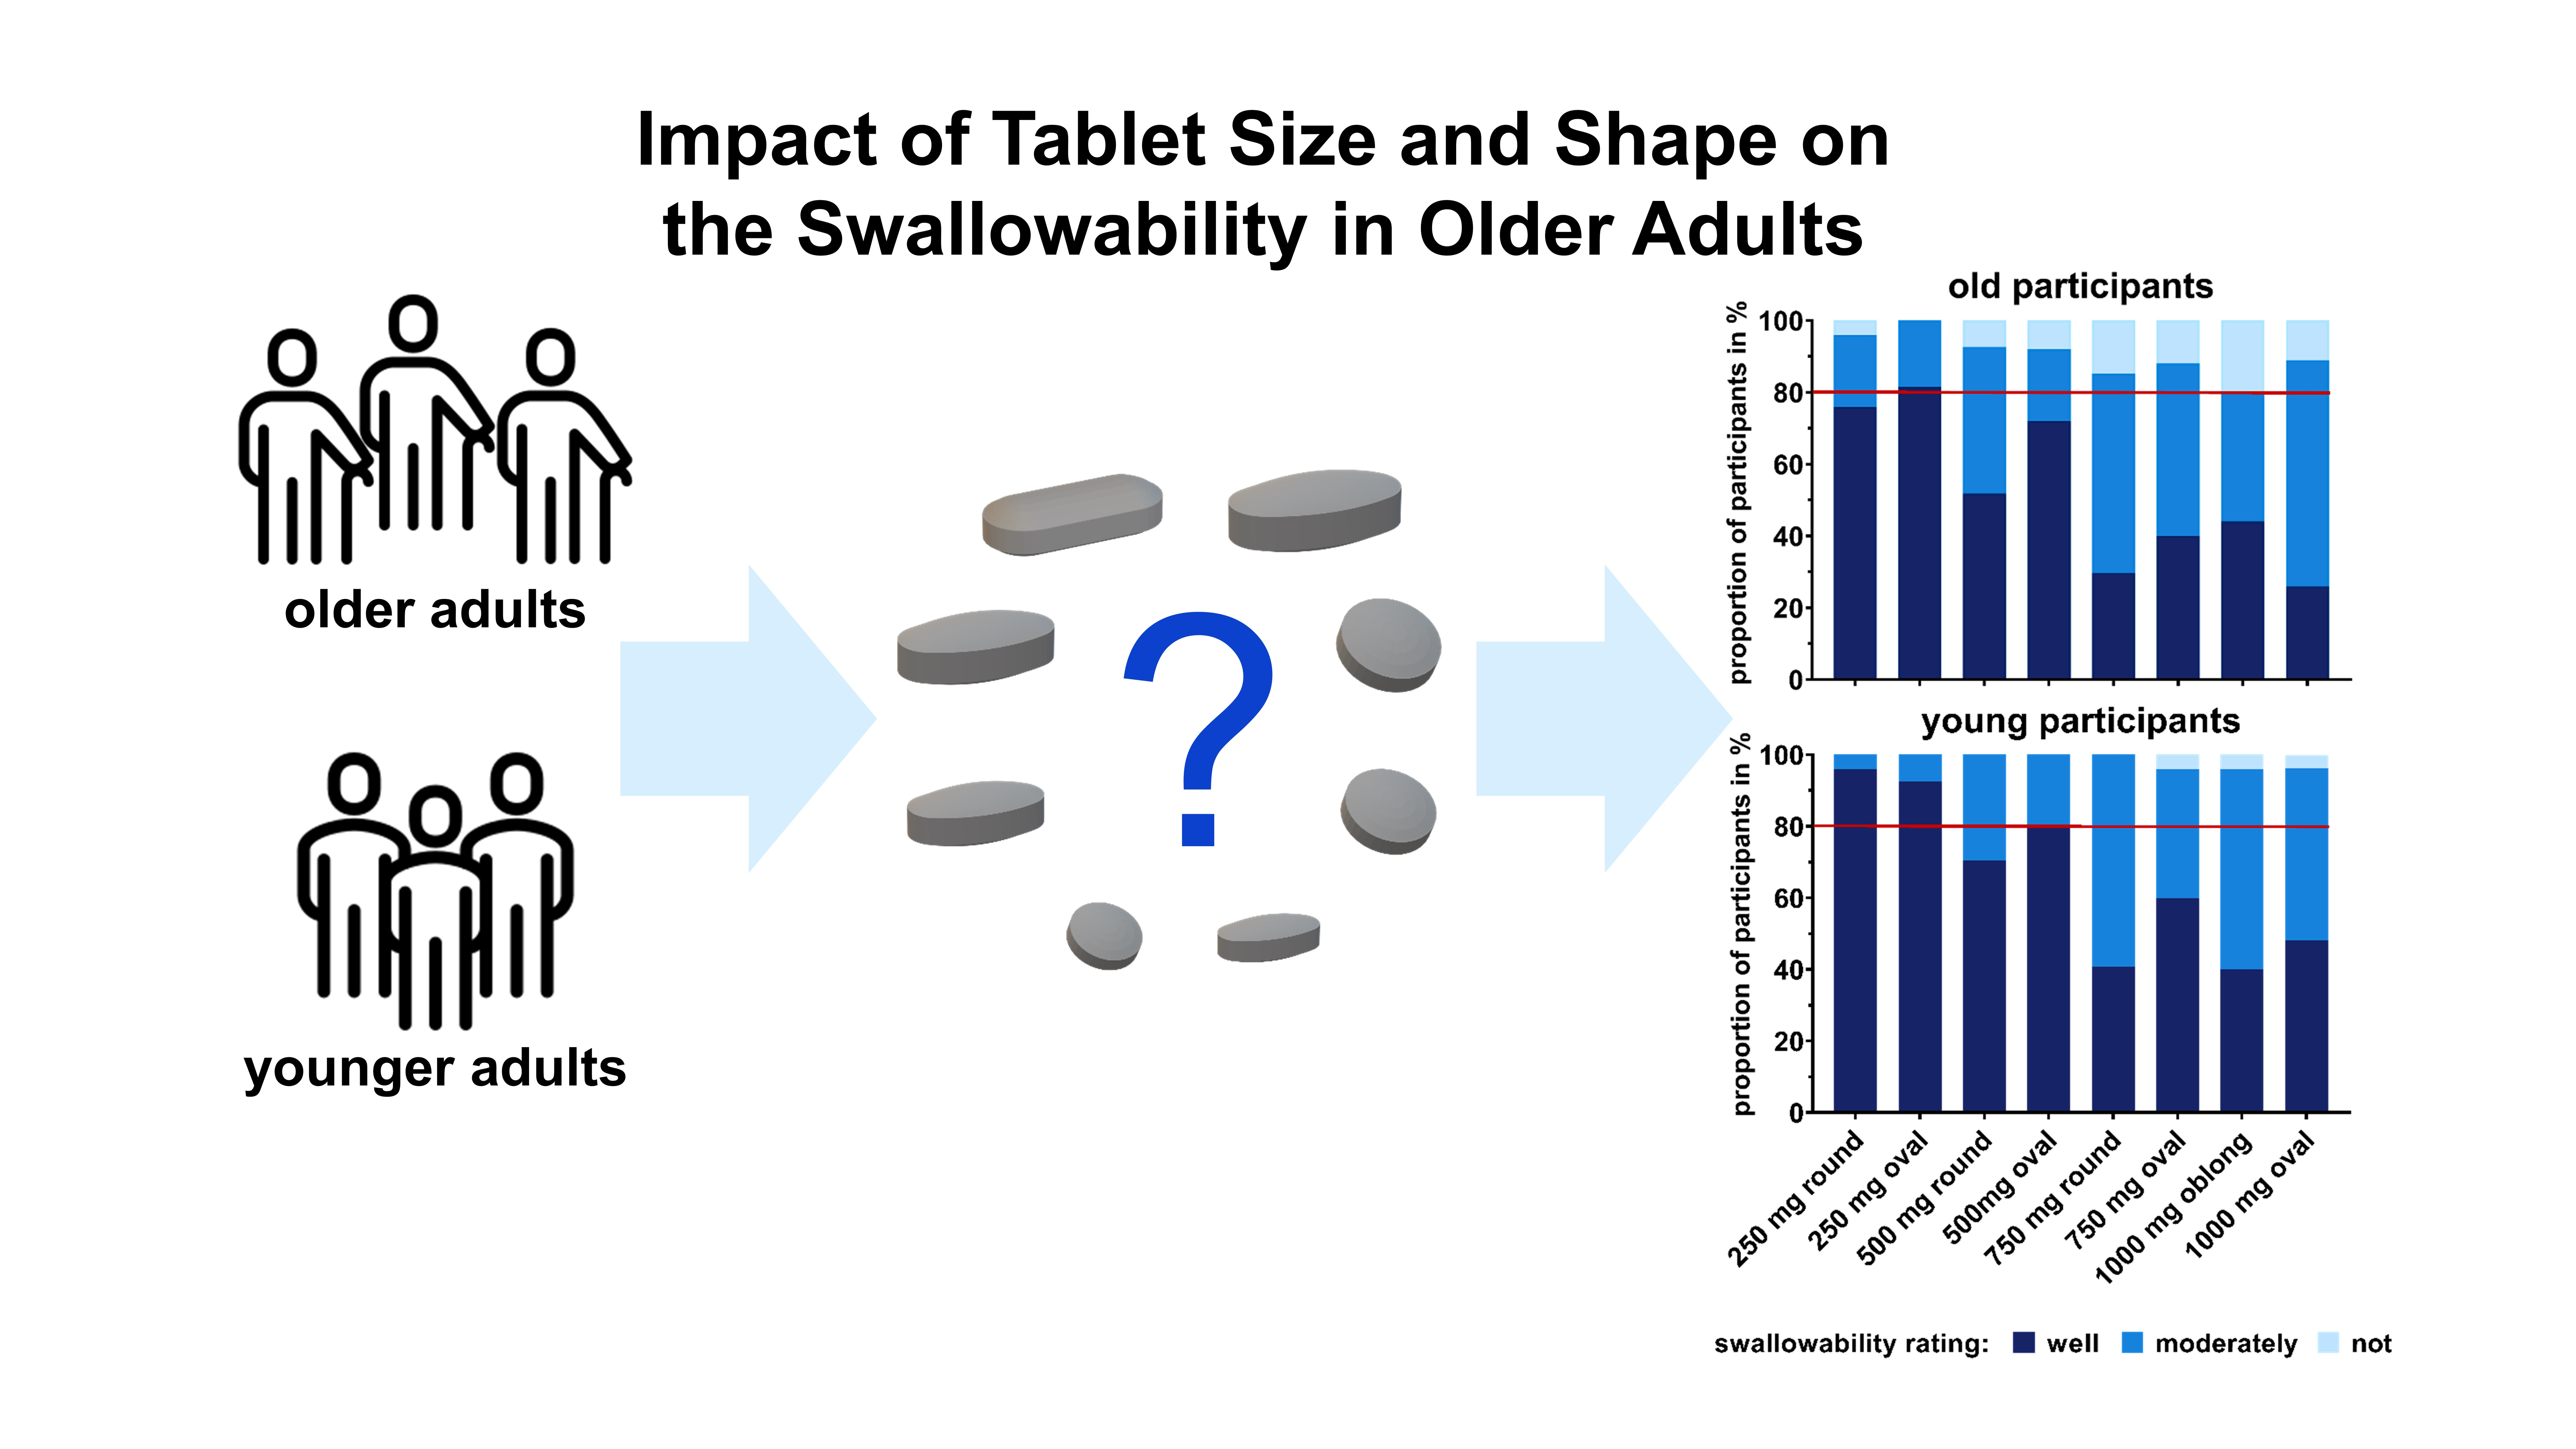 Impact of Tablet Size and Shape on the Swallowability in Older Adults